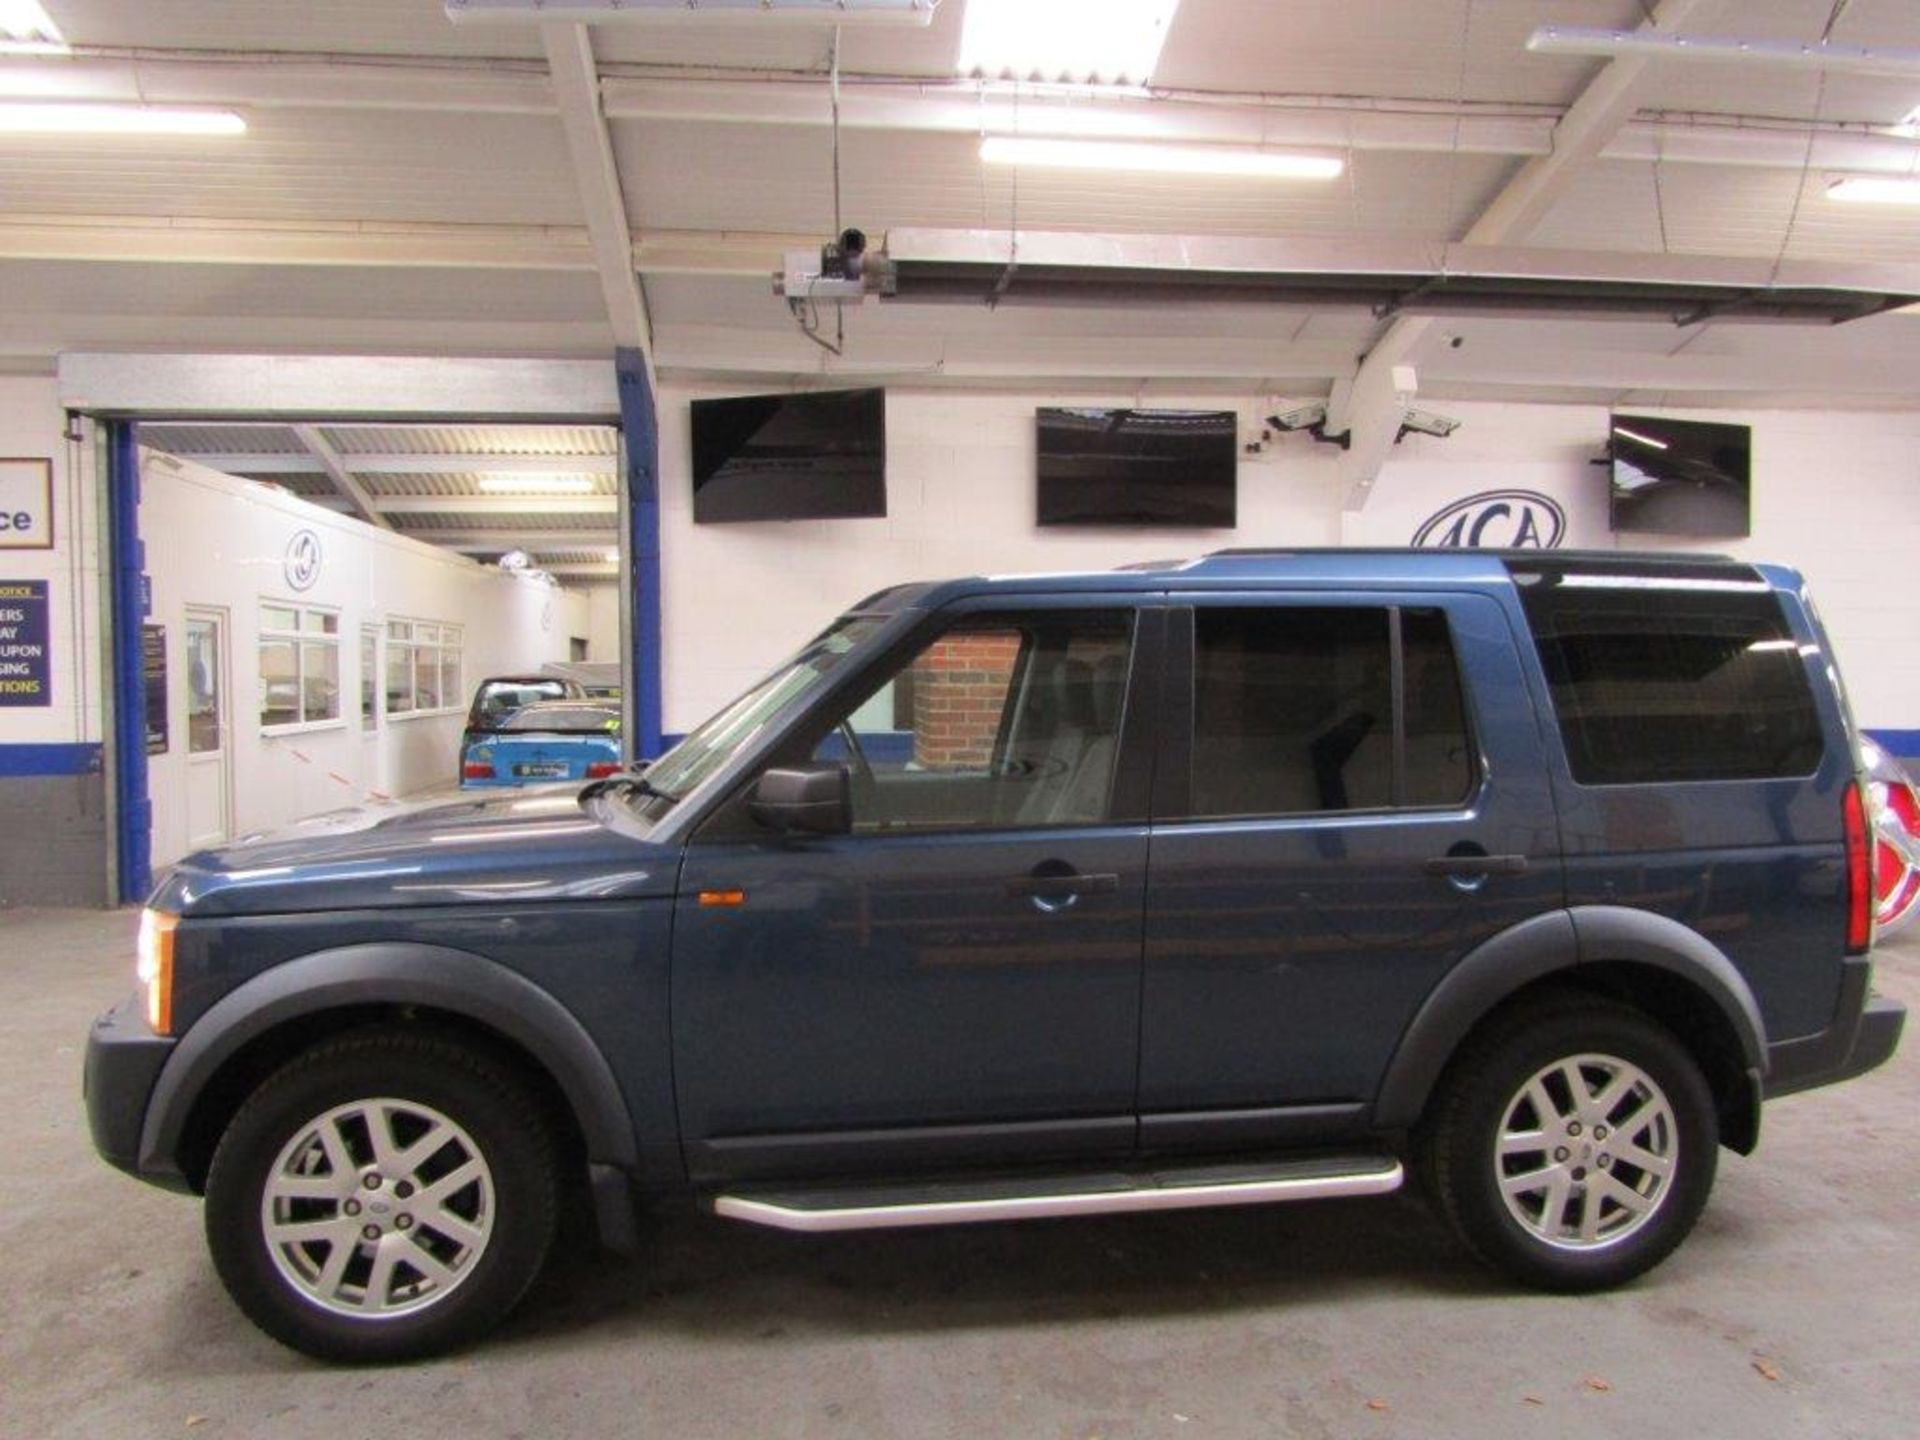 08 08 L/Rover Discovery TDV6 XS - Image 2 of 22